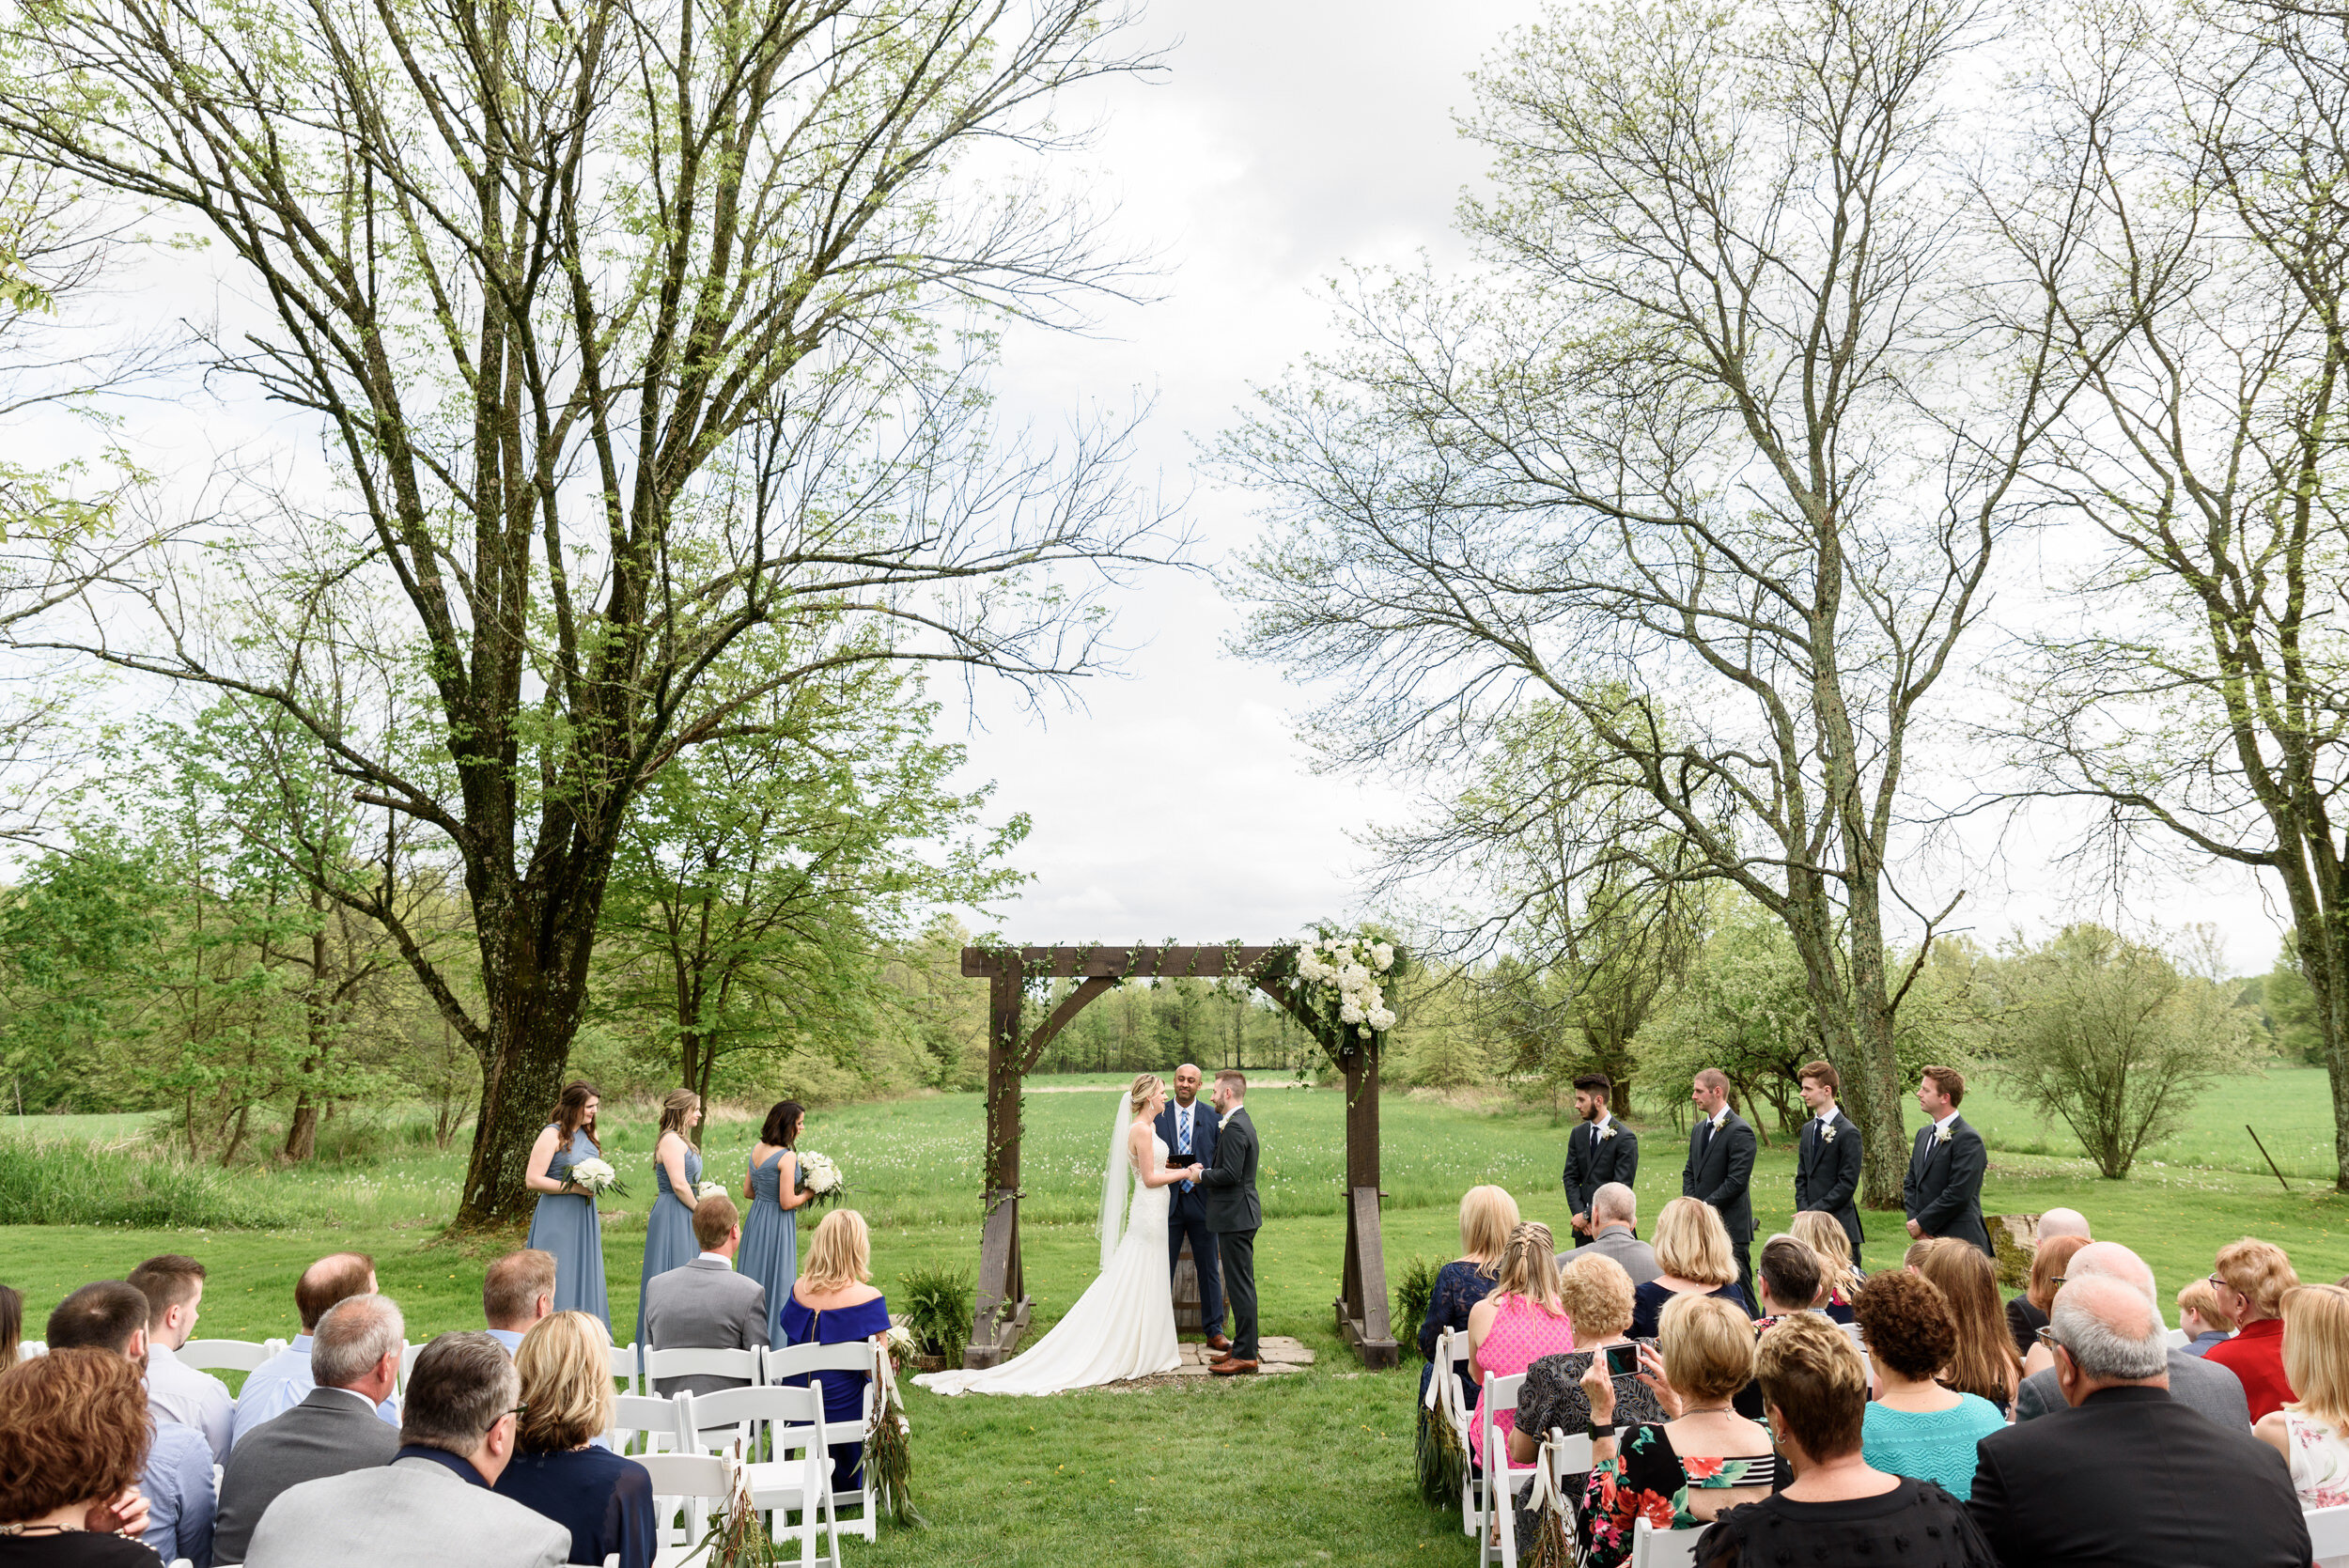 Outdoor wedding at The Farm Bakery and Events - Bucks County wedding photographer